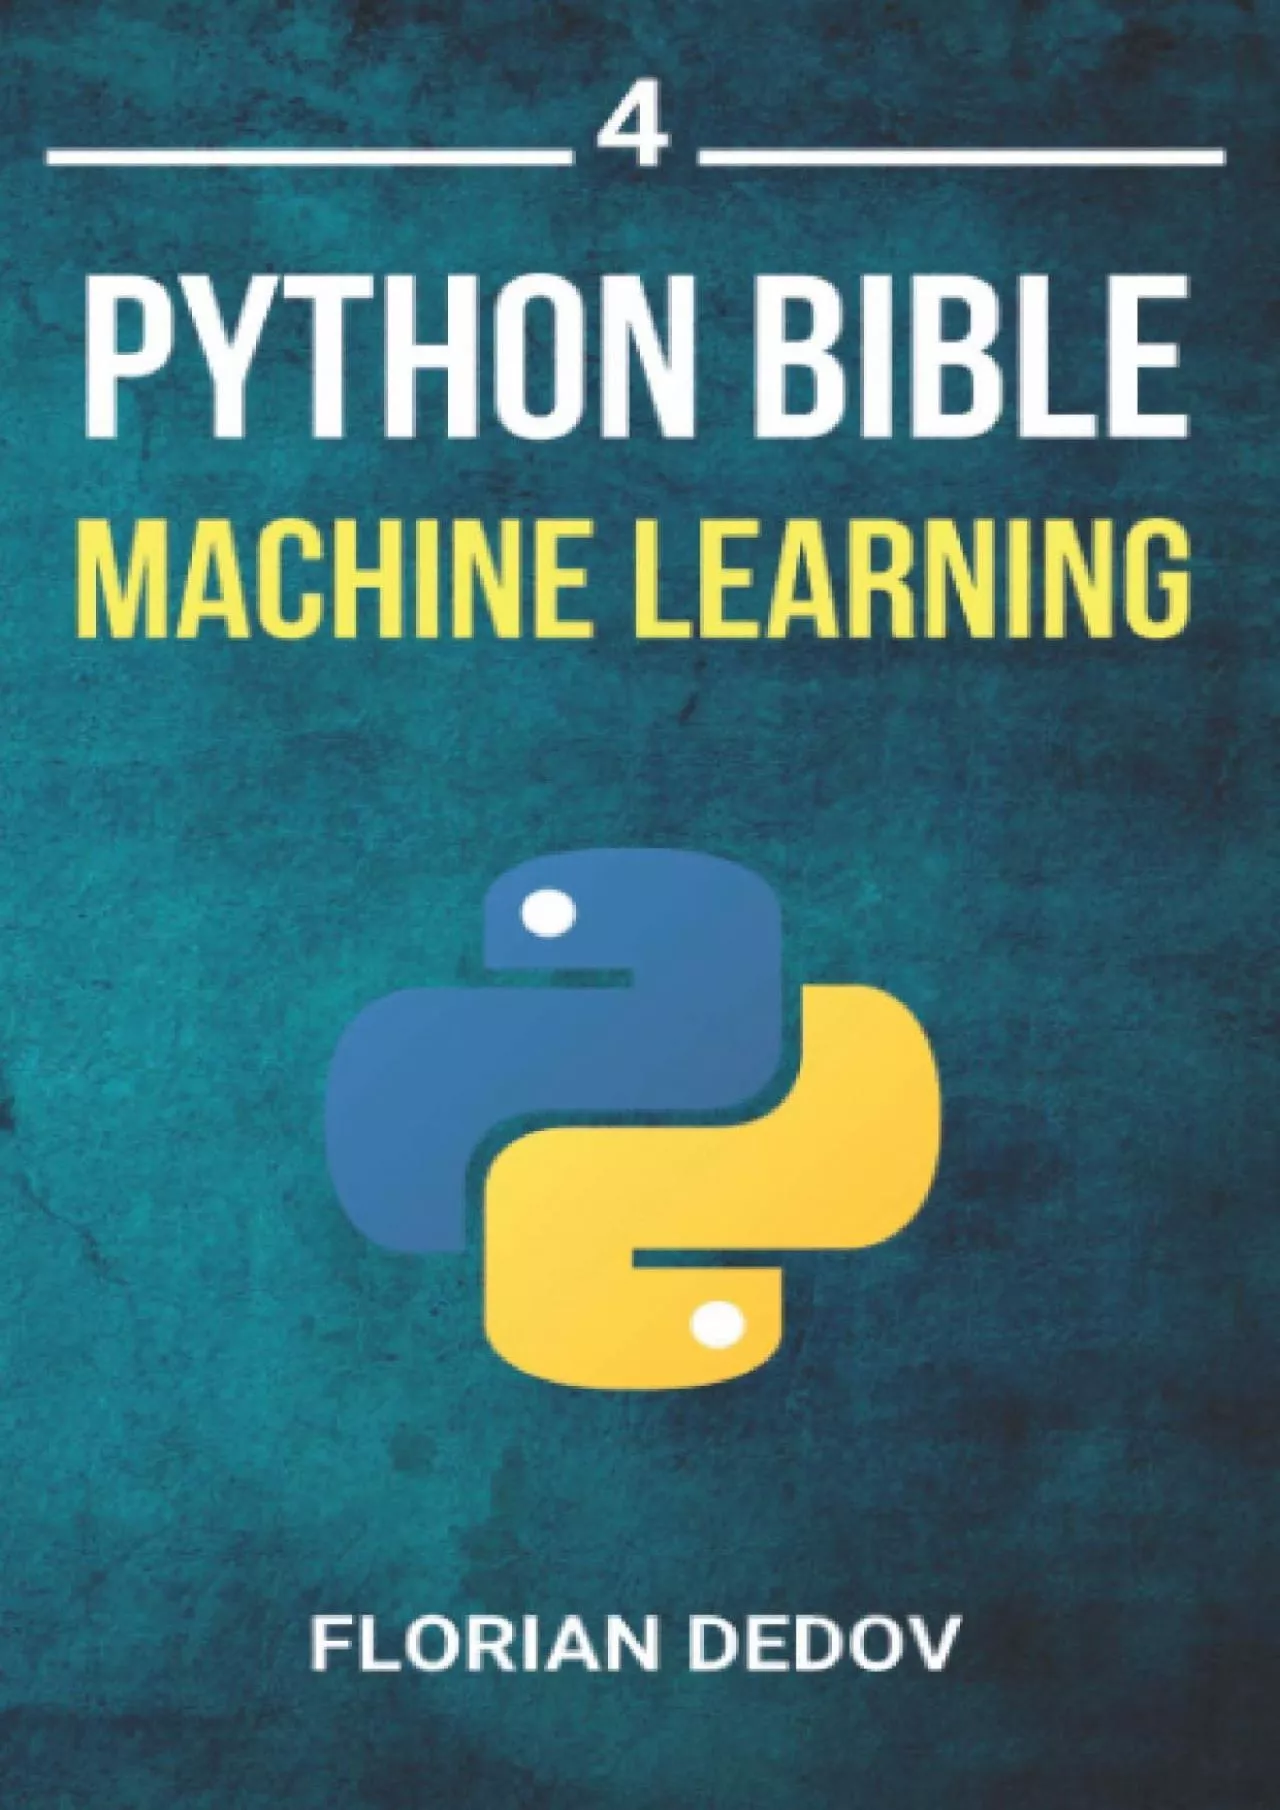 [FREE]-The Python Bible Volume 4 Machine Learning (Neural Networks, Tensorflow, Sklearn,